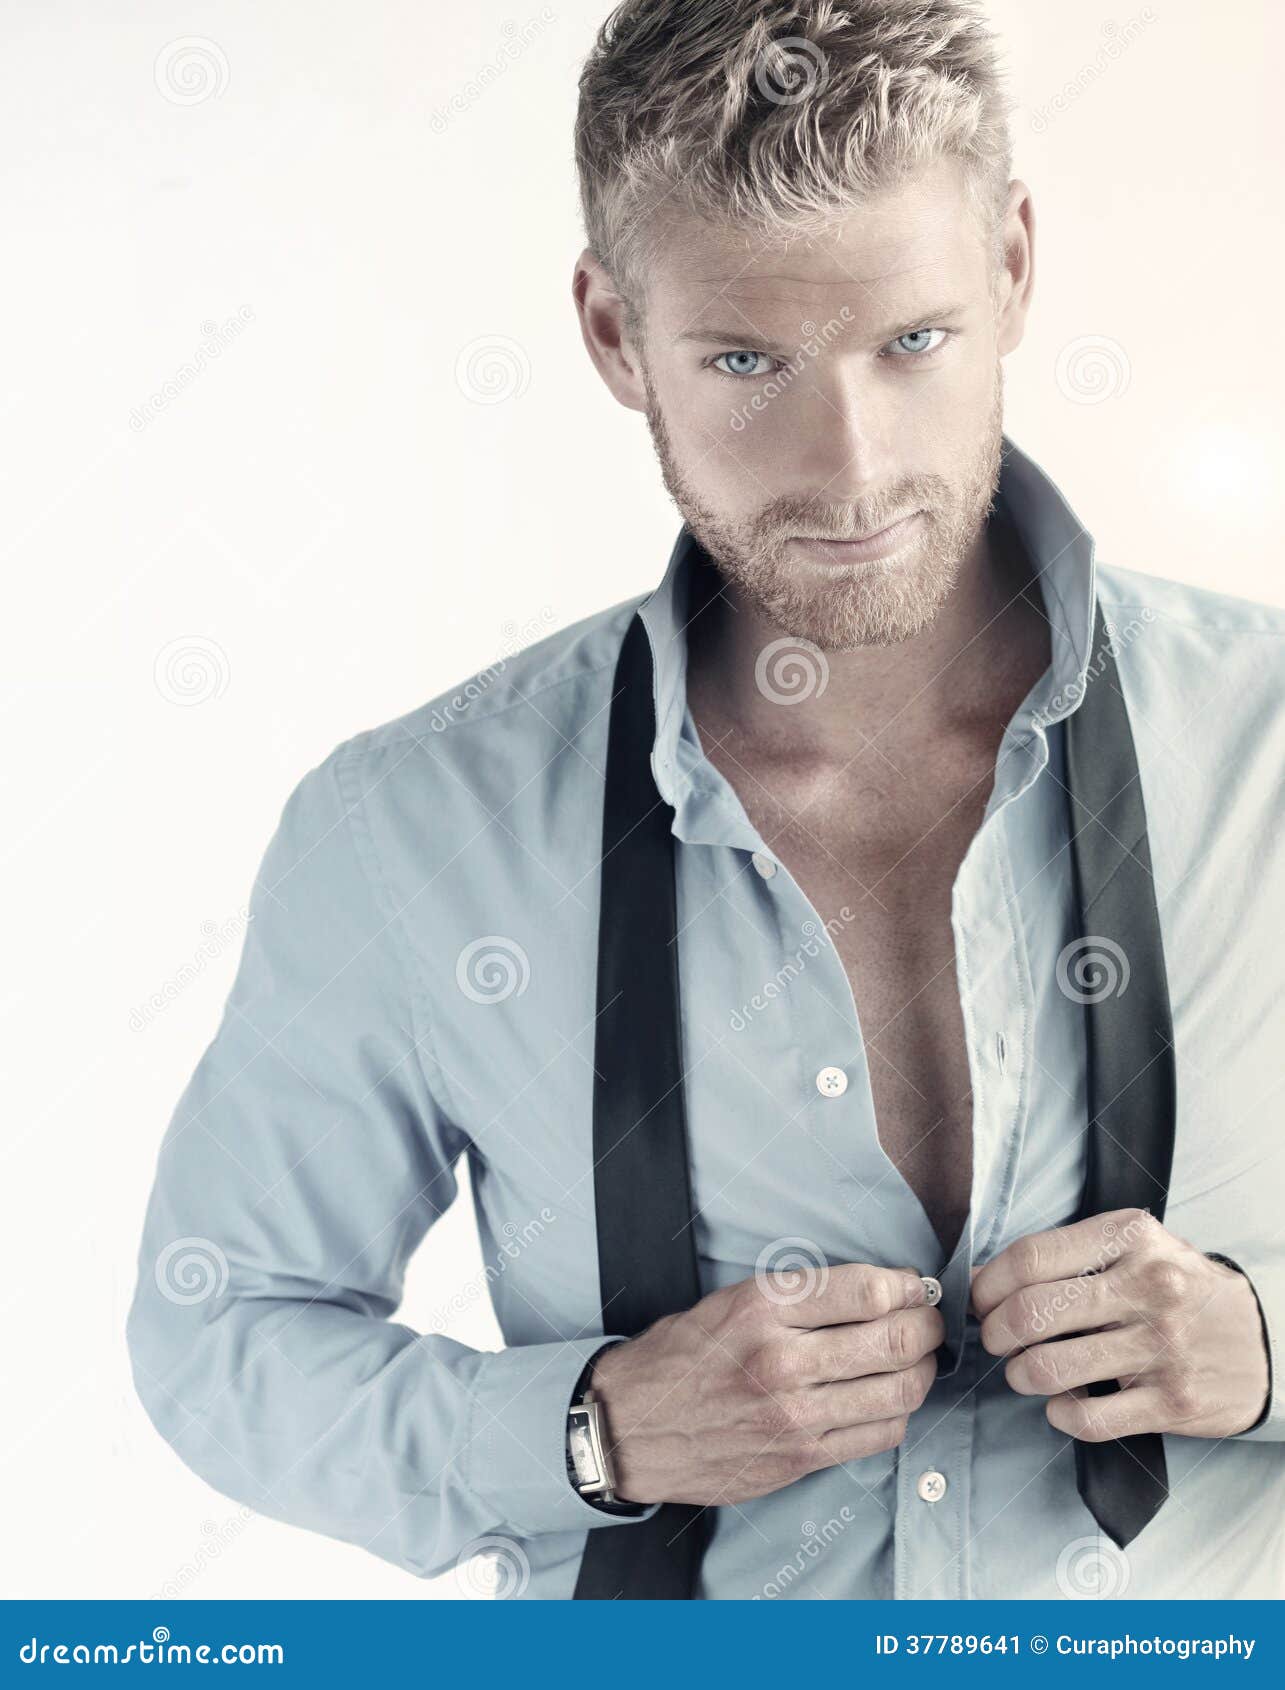 Young hunky business man stock image. Image of business - 37789641